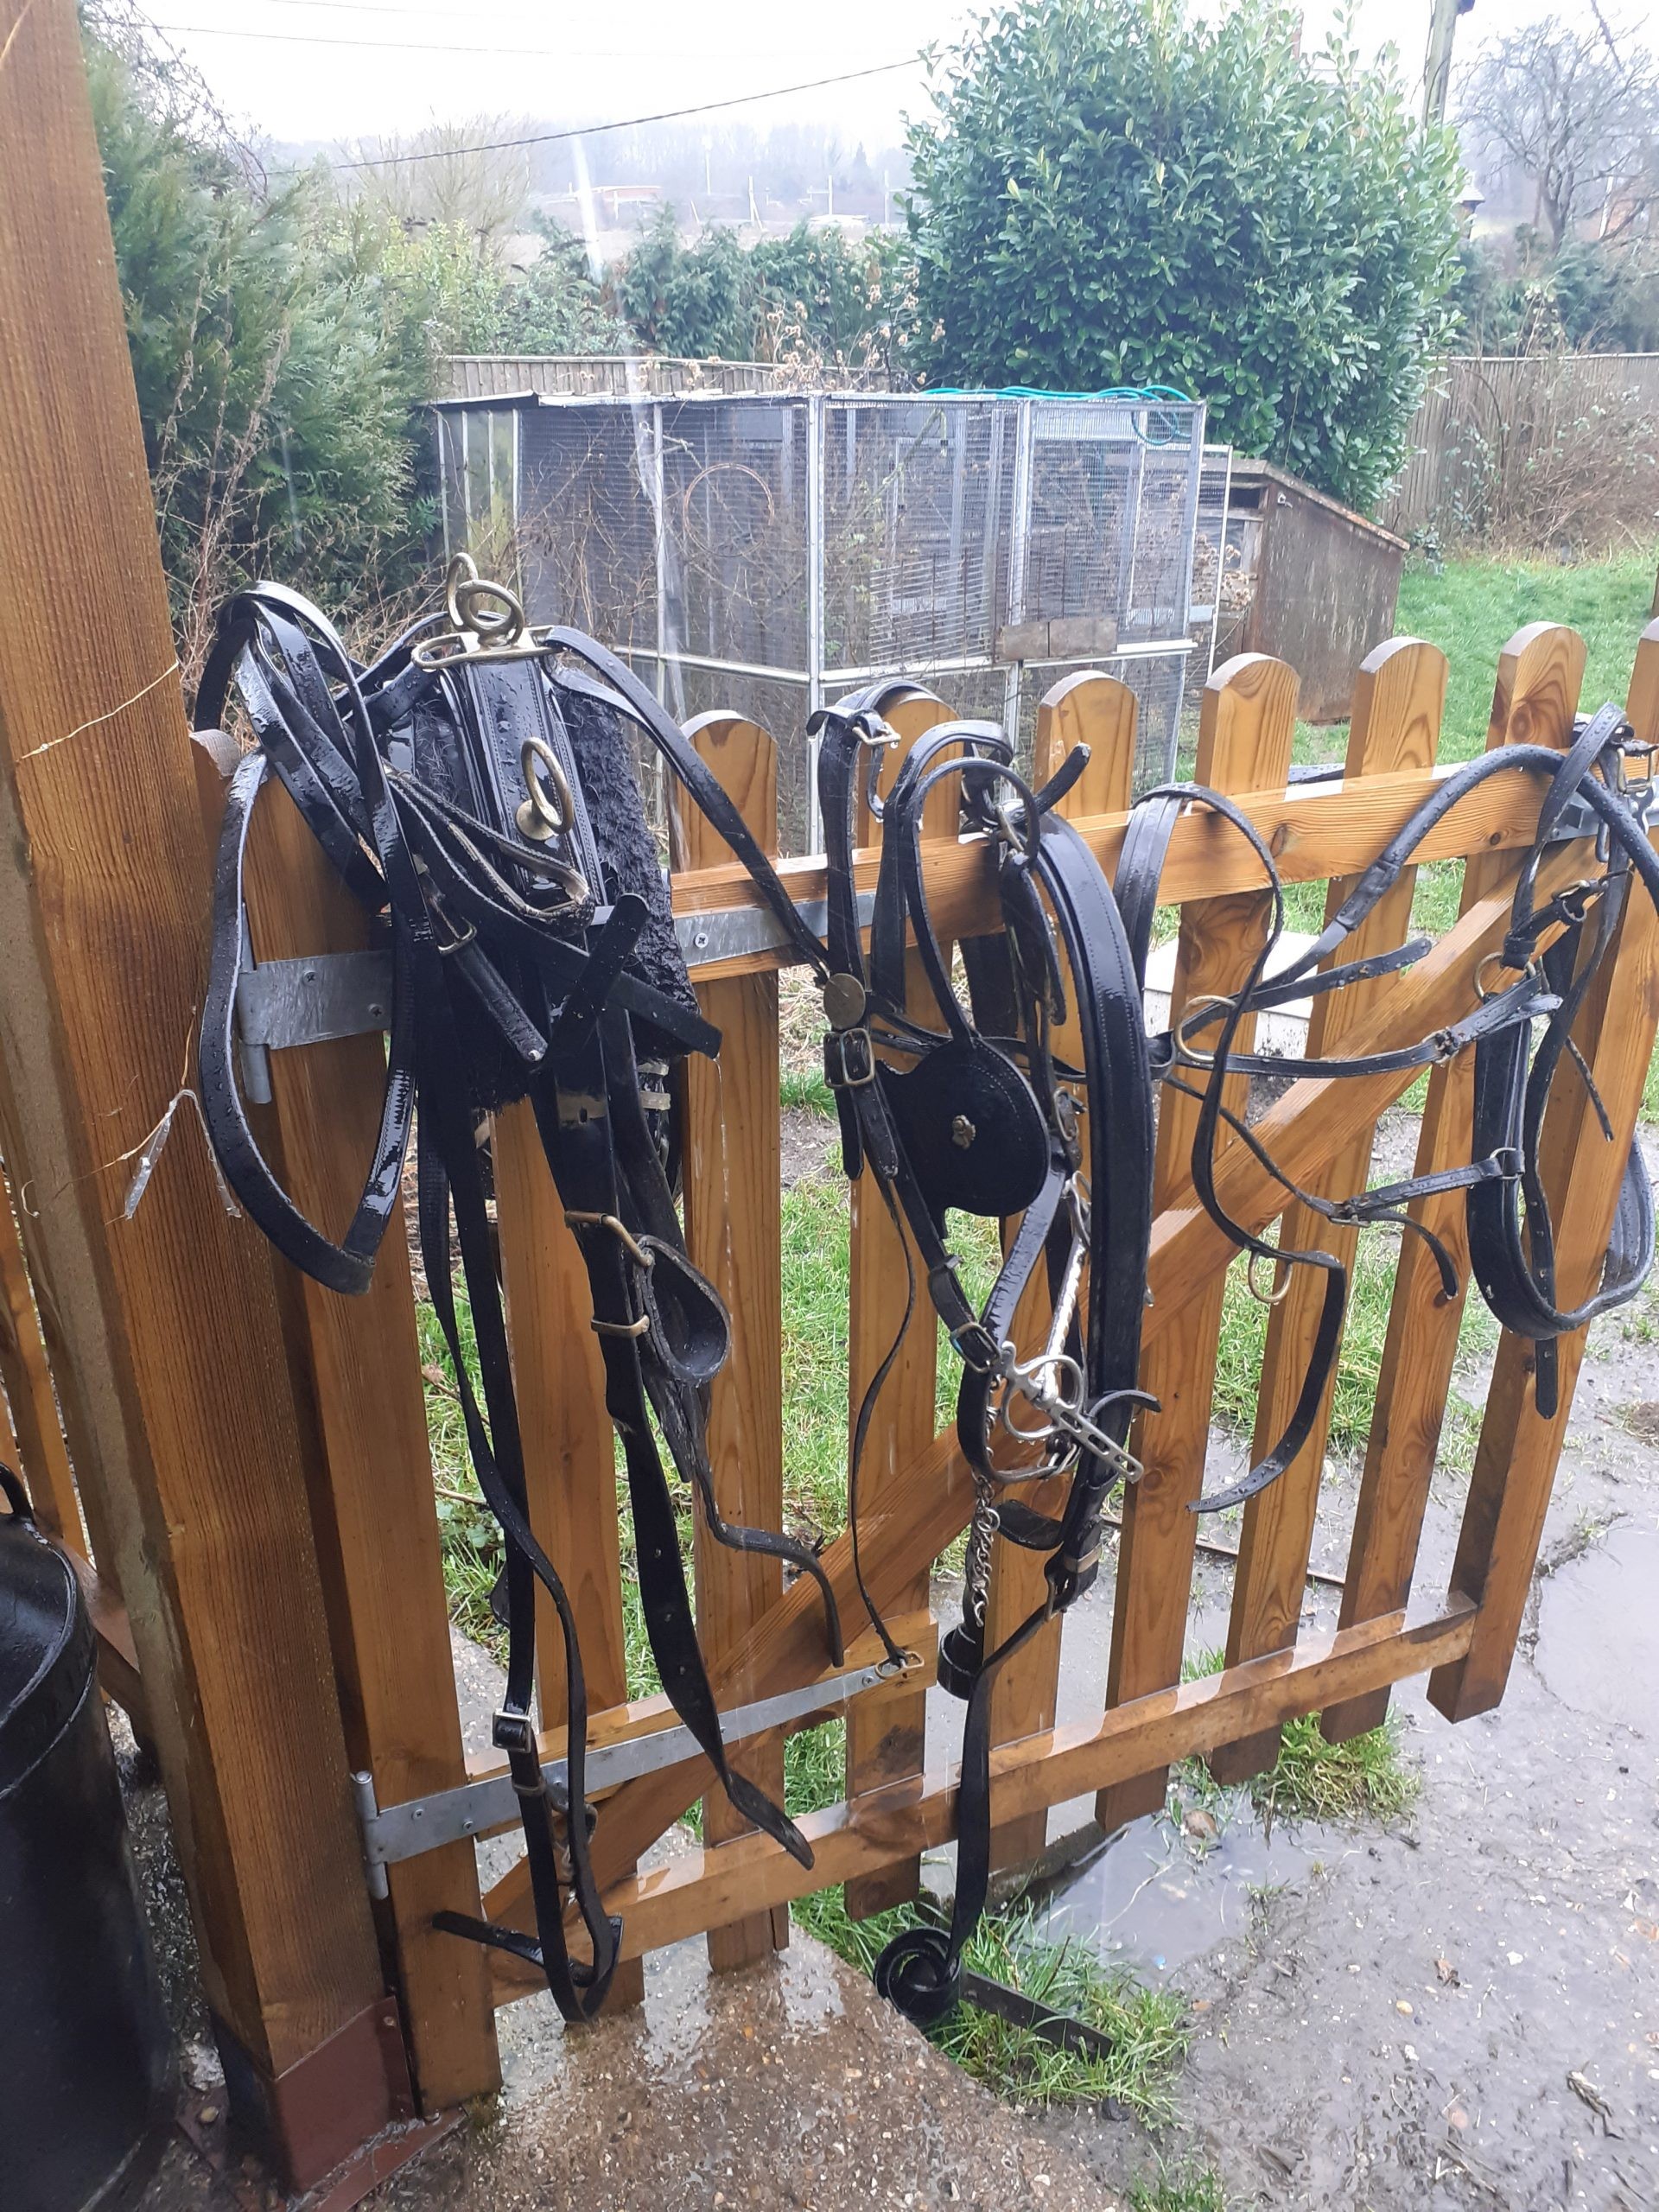 Used set of Top Mark cob size breastcollar harness